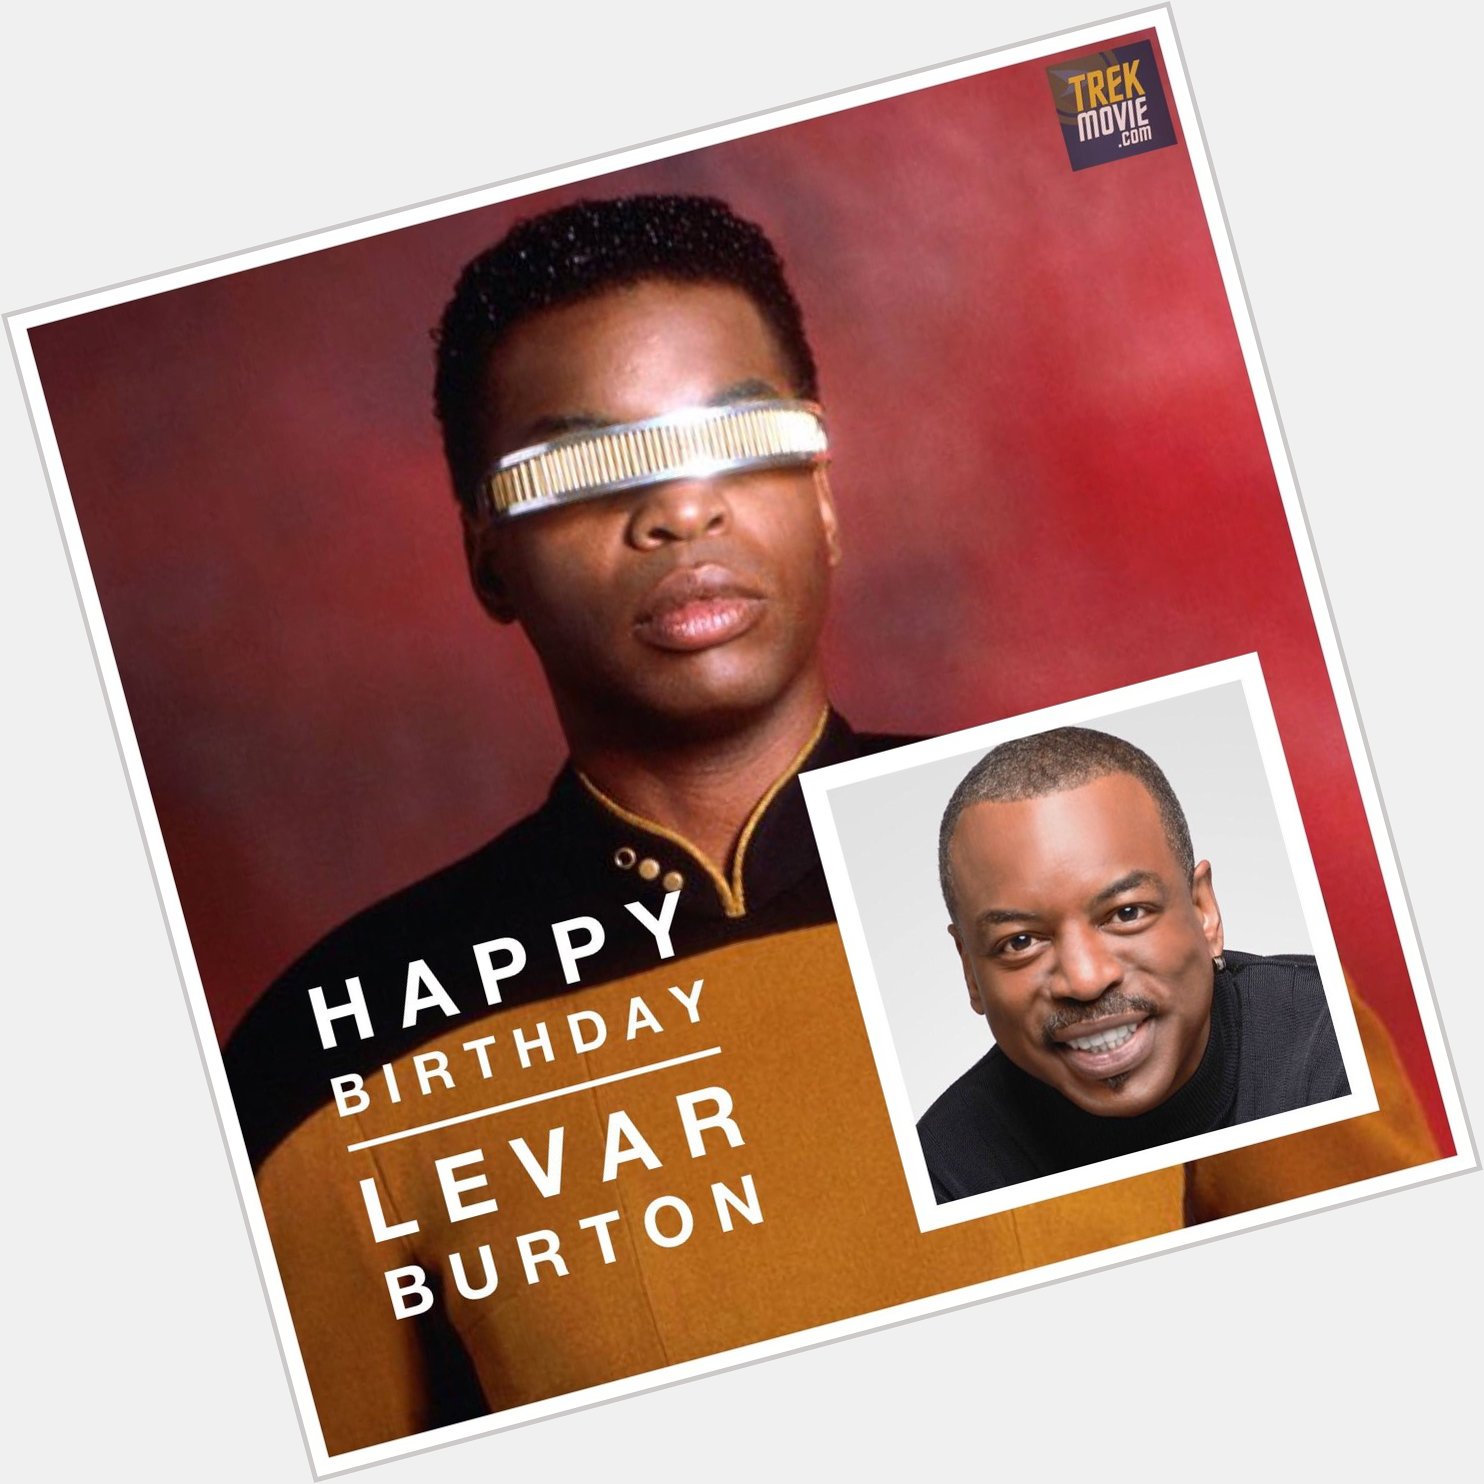  Happy Birthday Levar Burton! May you have the best day ever! 